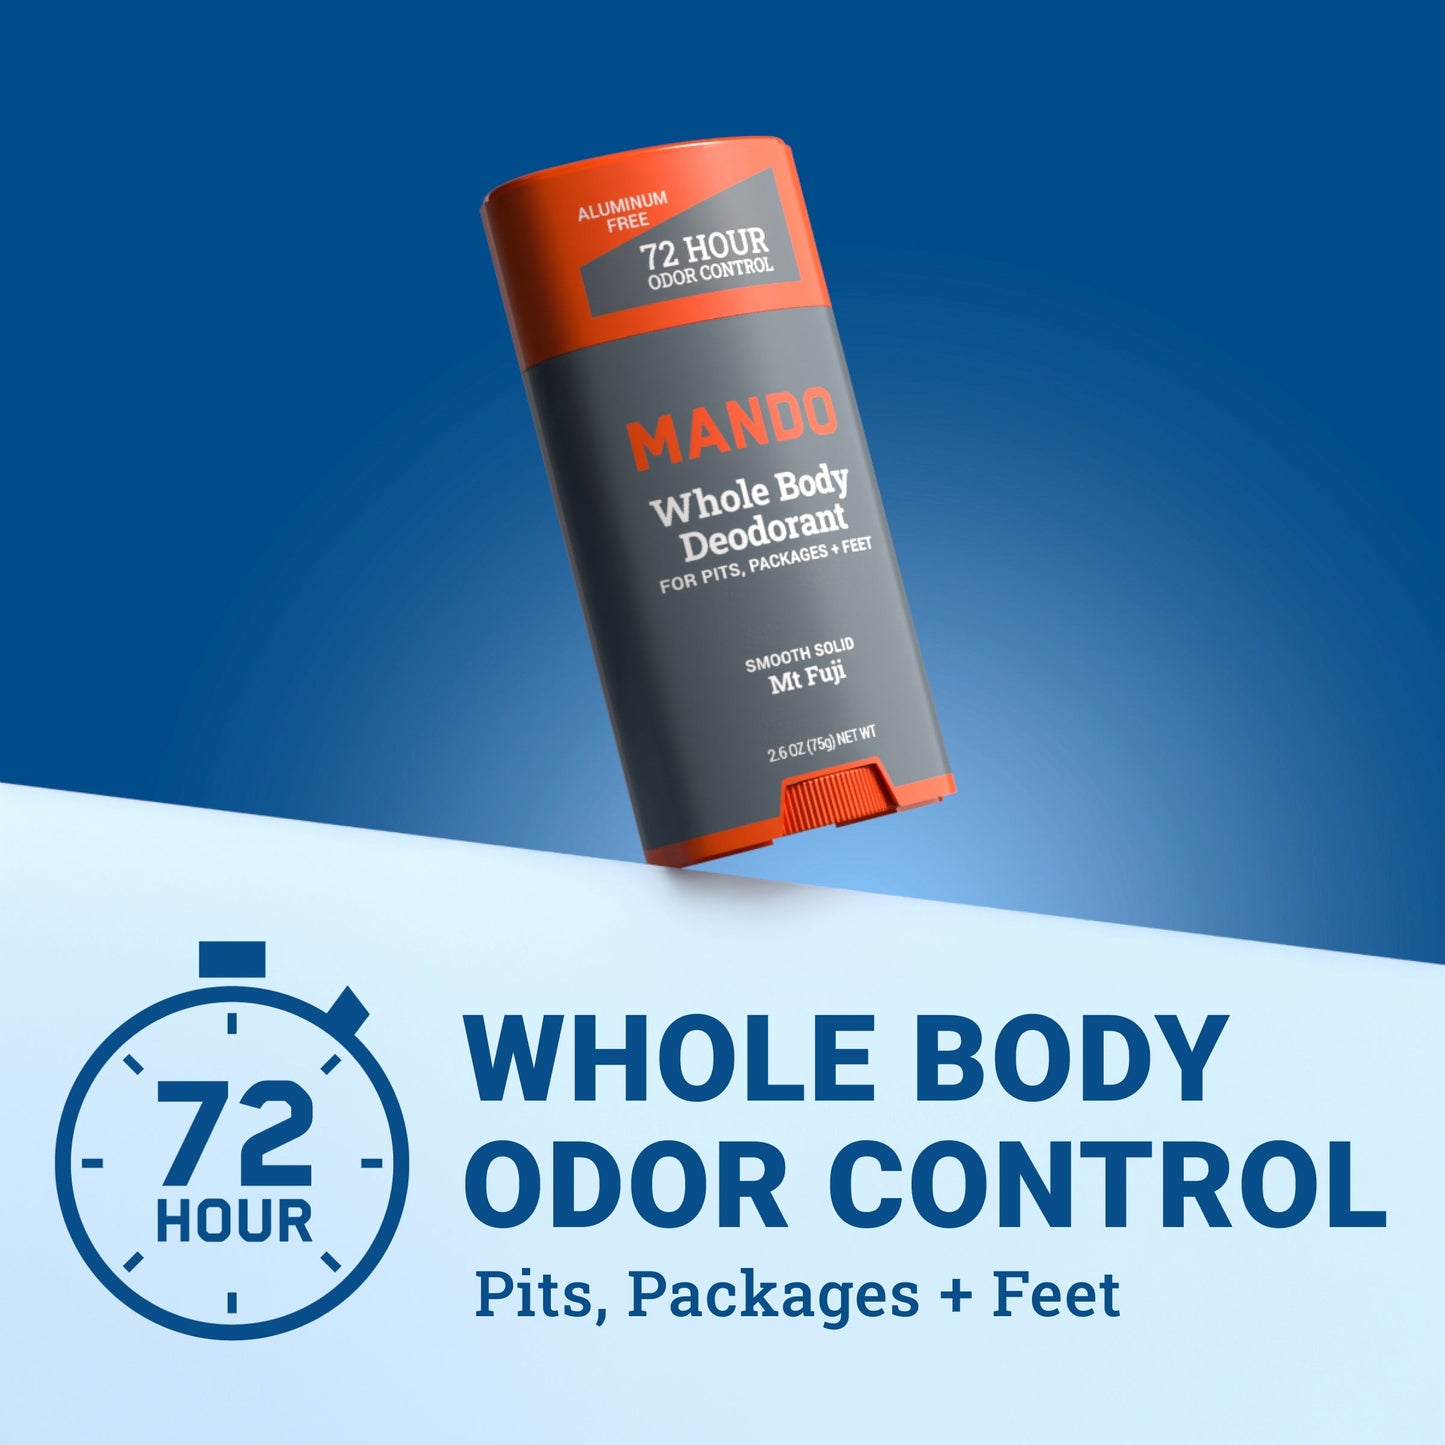 orange and grey stick of Mando mt fuji deodorant with text: 72 hour whole body odor control, pits, packages + feet